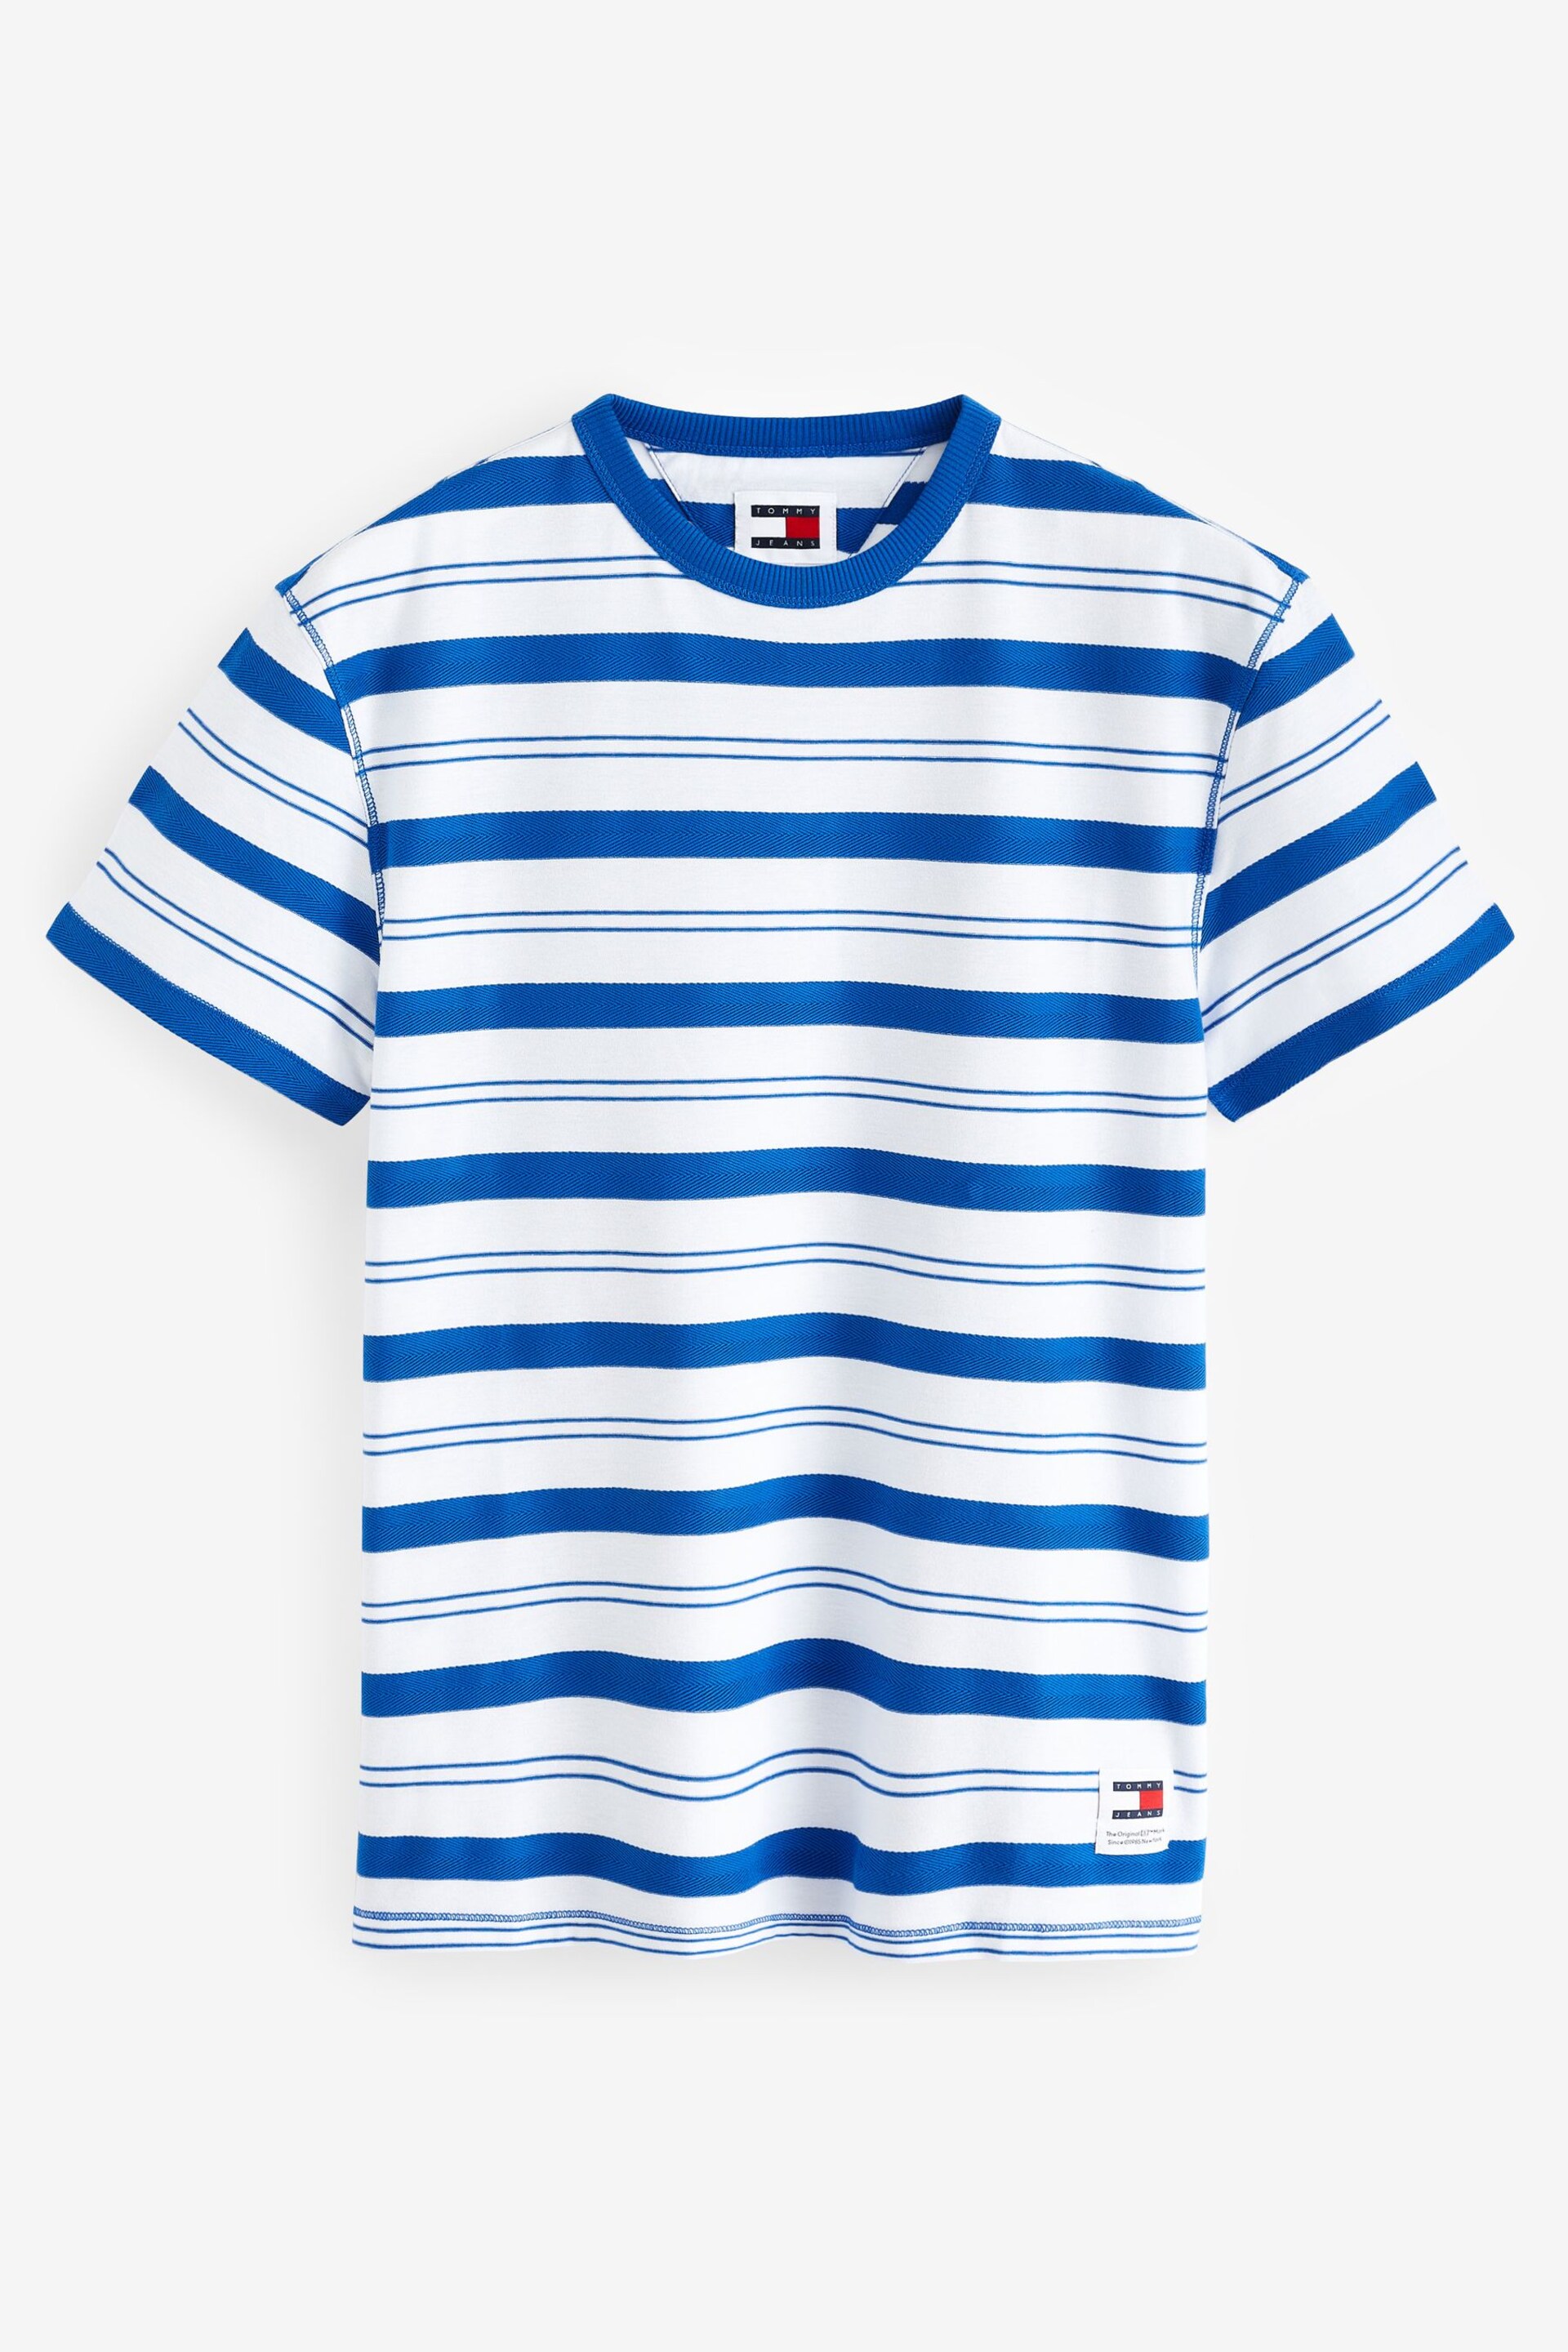 Tommy Jeans Blue Stripe T-Shirt - Image 1 of 2